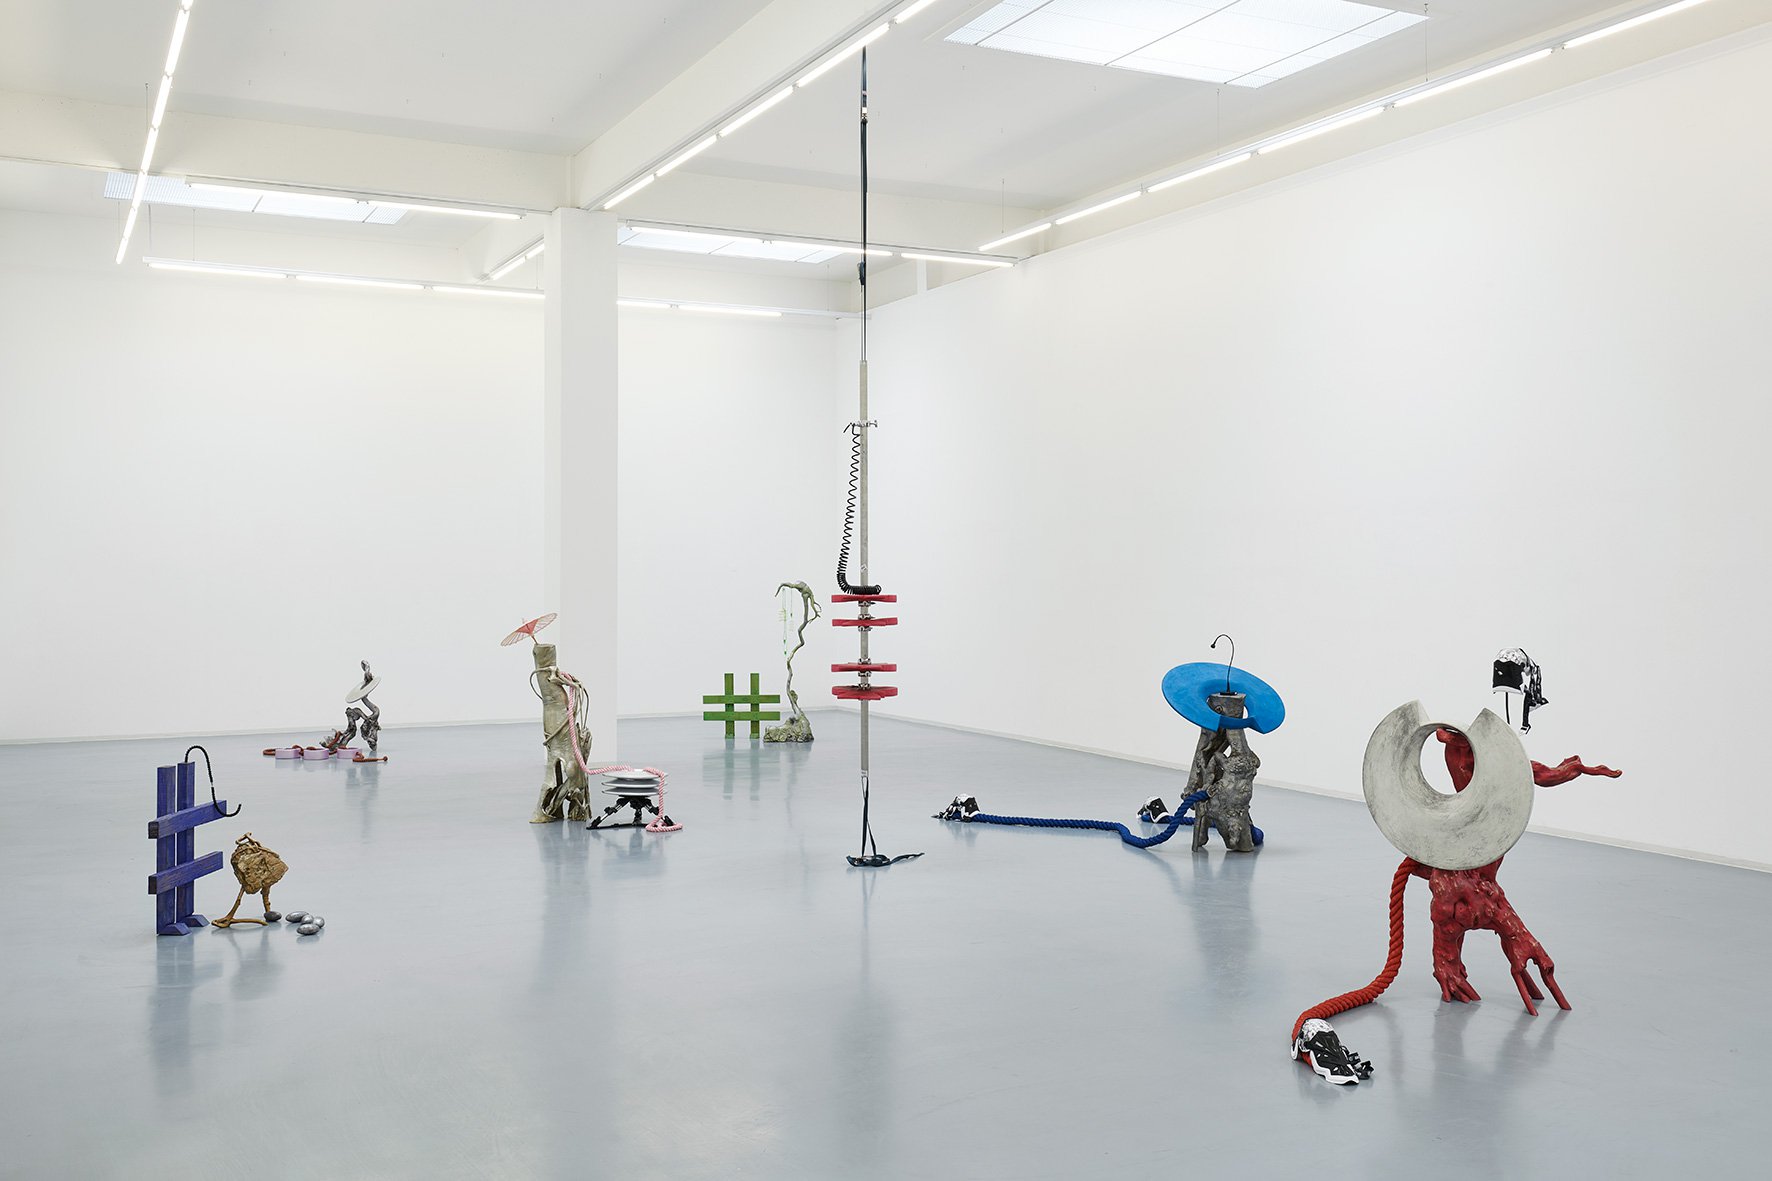 Guan Xiao, Products Farming, installation view, 2019, Bonner Kunstverein. Courtesy the artist, Antenna Space, Shanghai and Kraupa-Tuskany Zeidler, Berlin. Photo: Mareike Tocha.